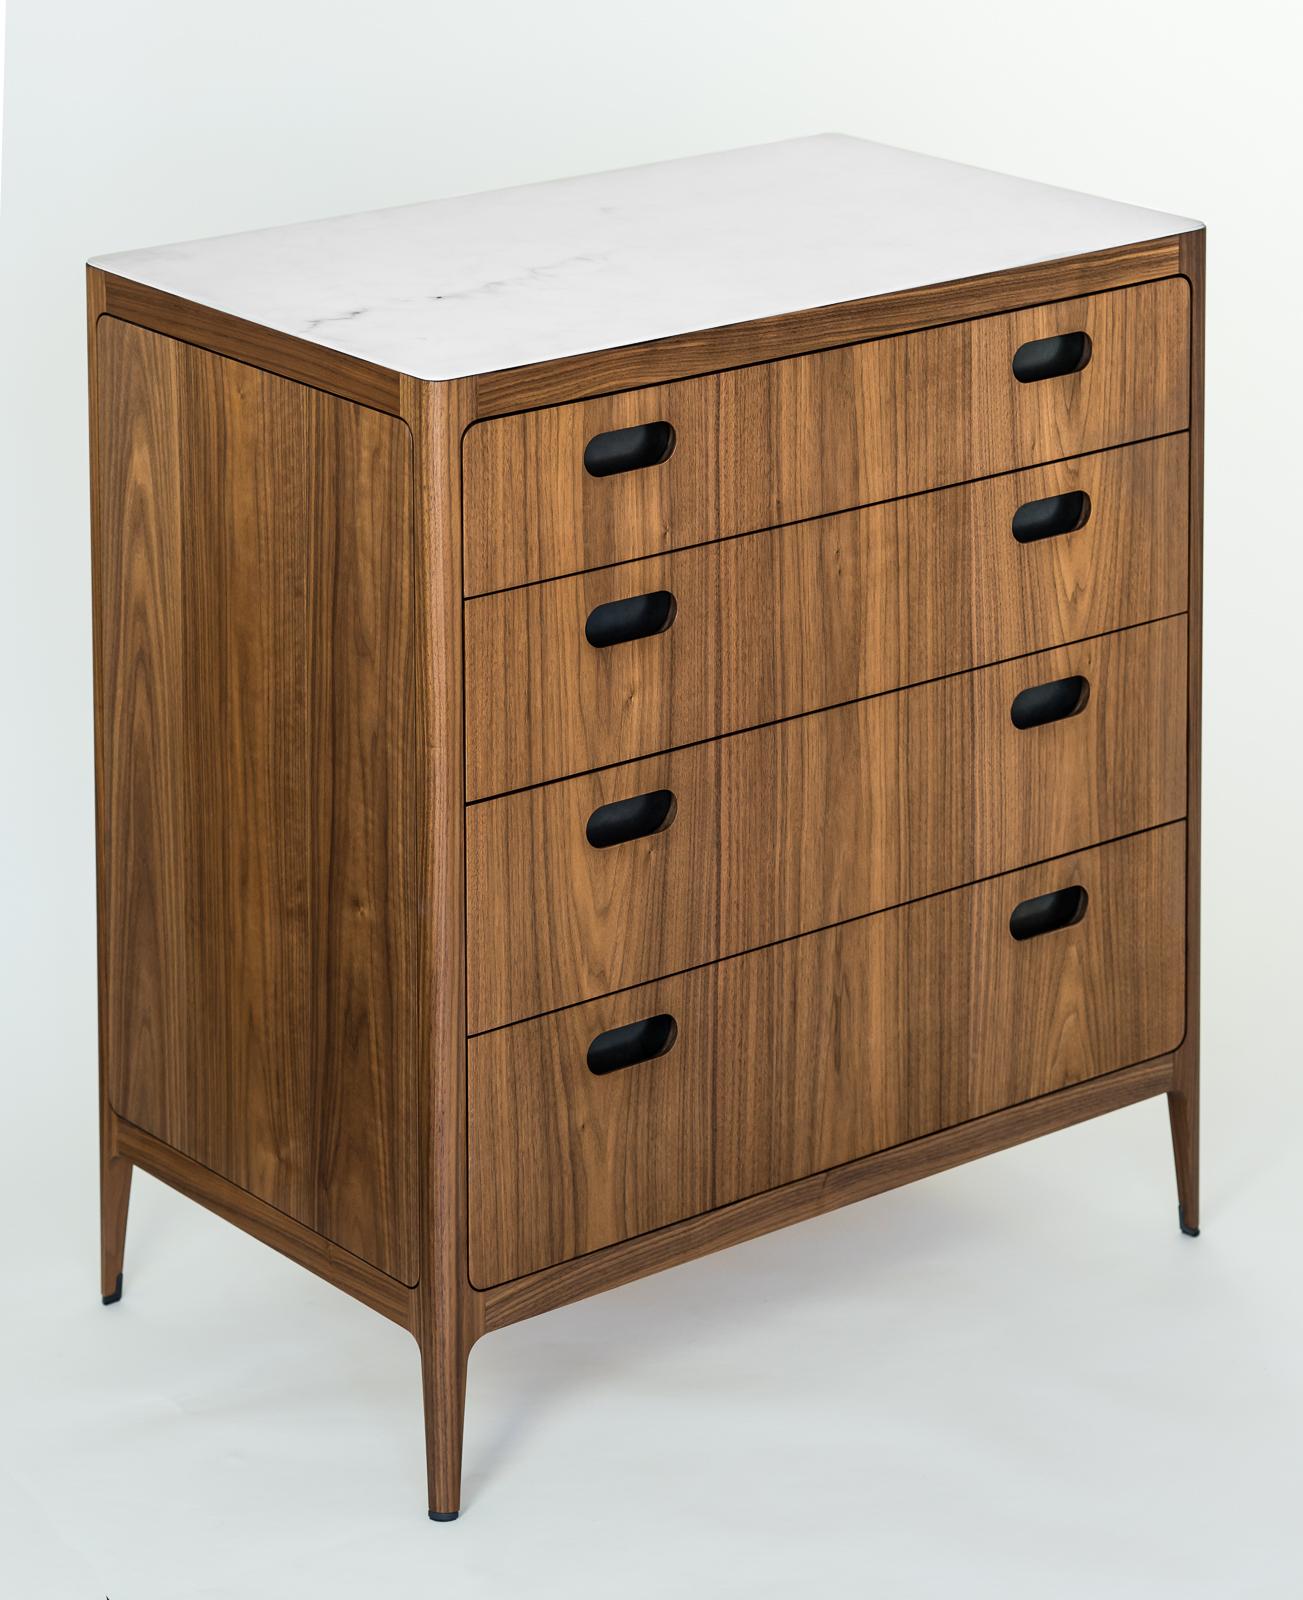 This customizable walnut dresser from the Munson Furniture Radius collection draws inspiration from mid-century designs and fits beautifully with both traditional and contemporary interiors. Overall dimensions as well as the height and number of